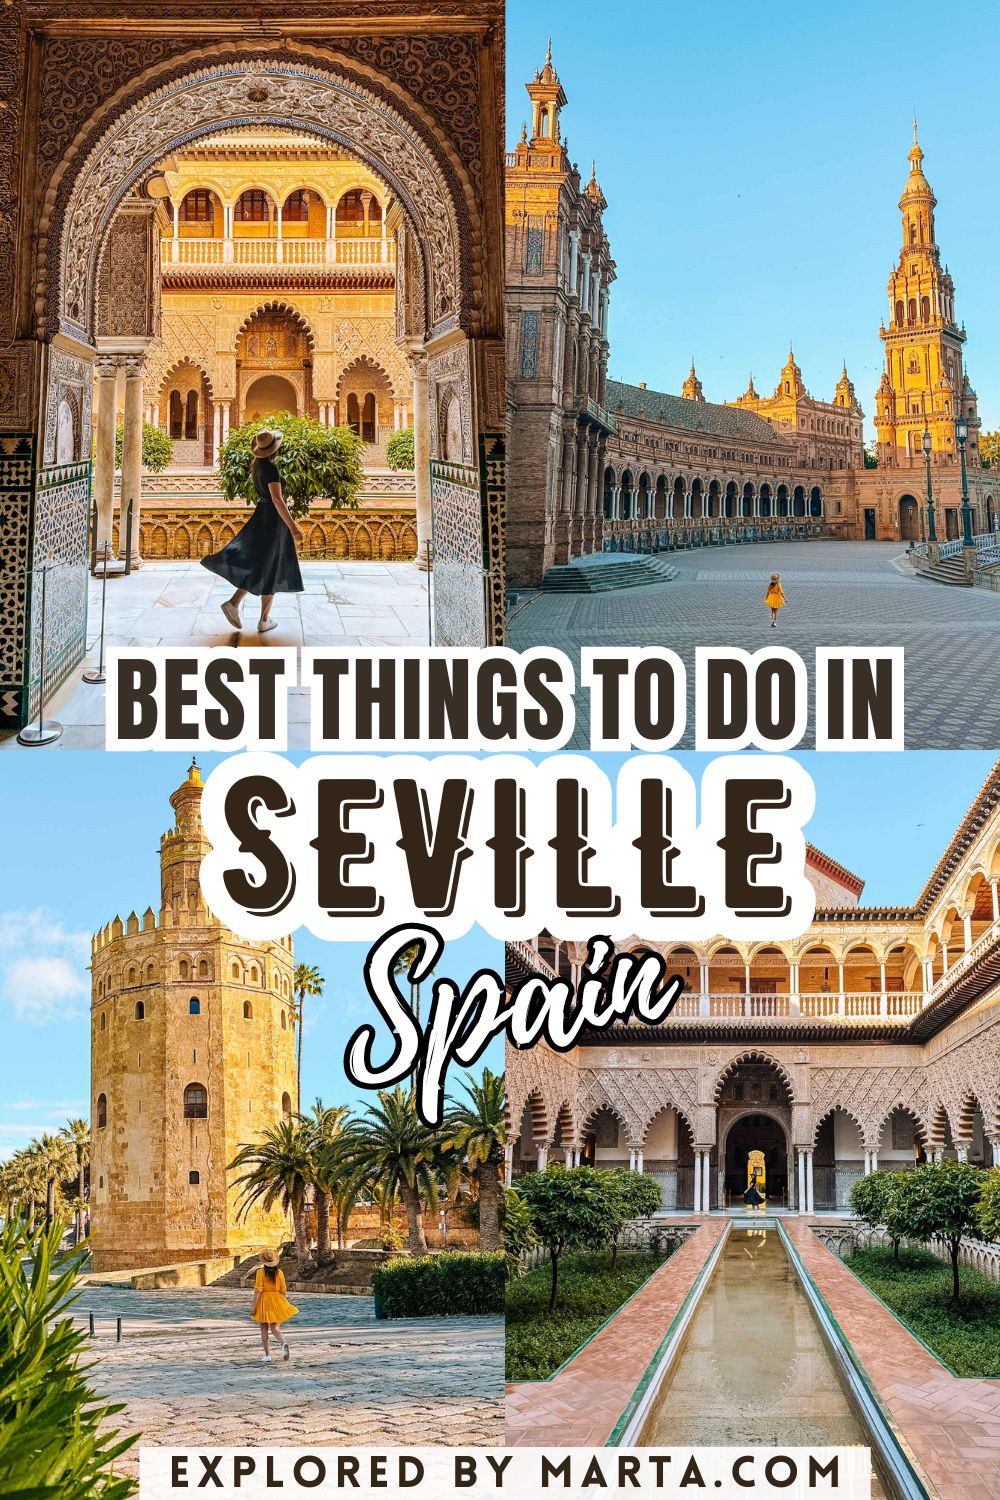 Ultimate bucket list - best things to do in Seville, Spain